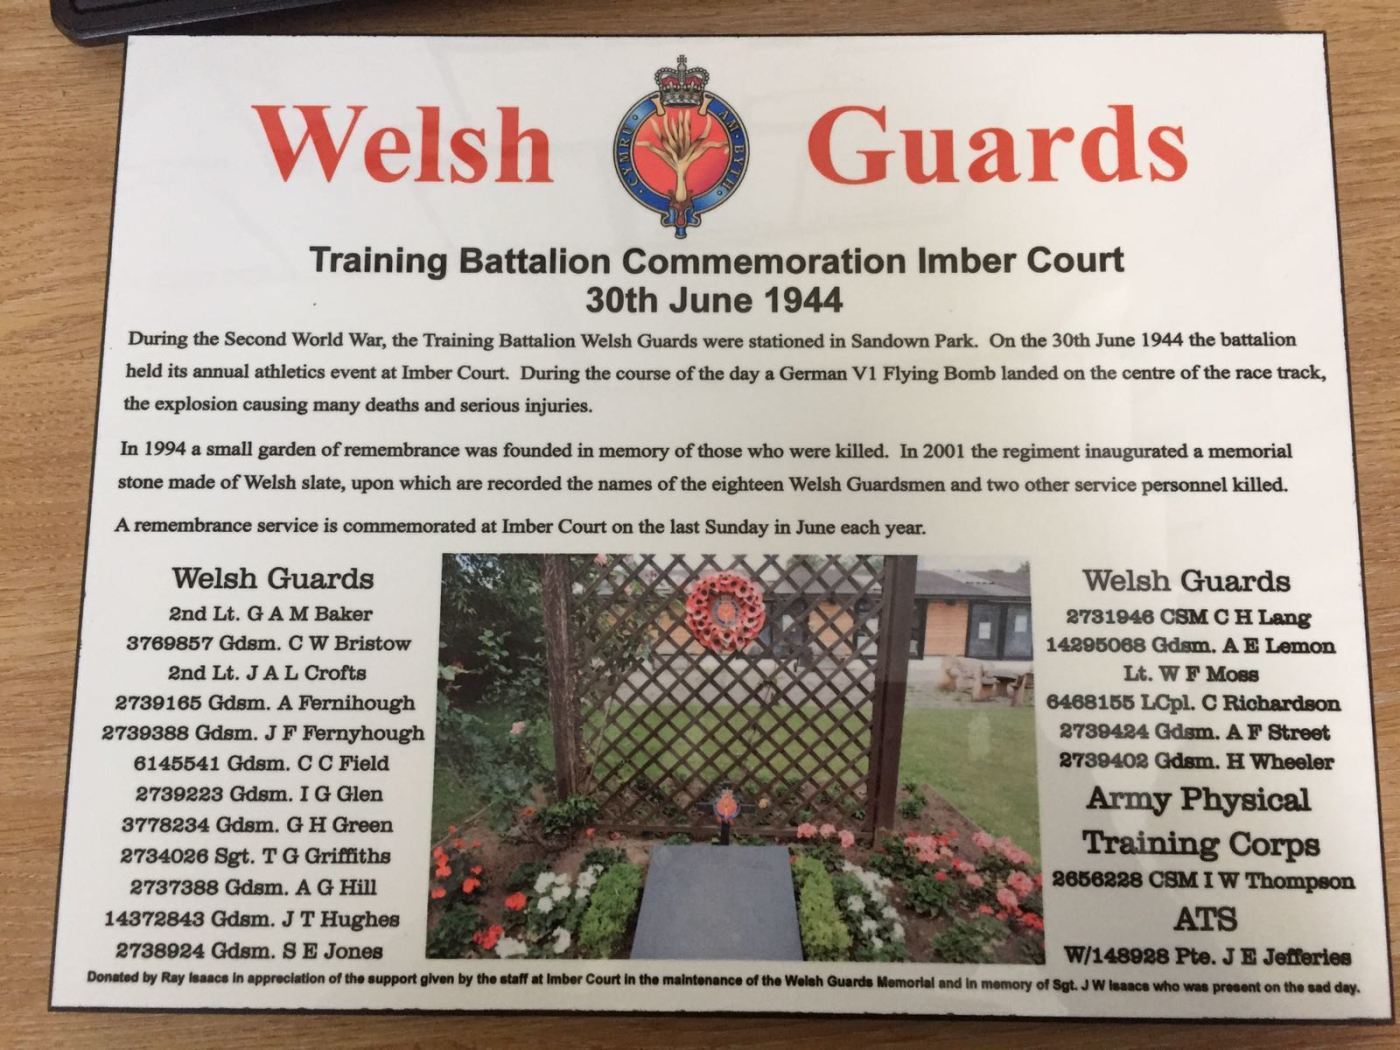 The Welsh Guards memorial at imber court